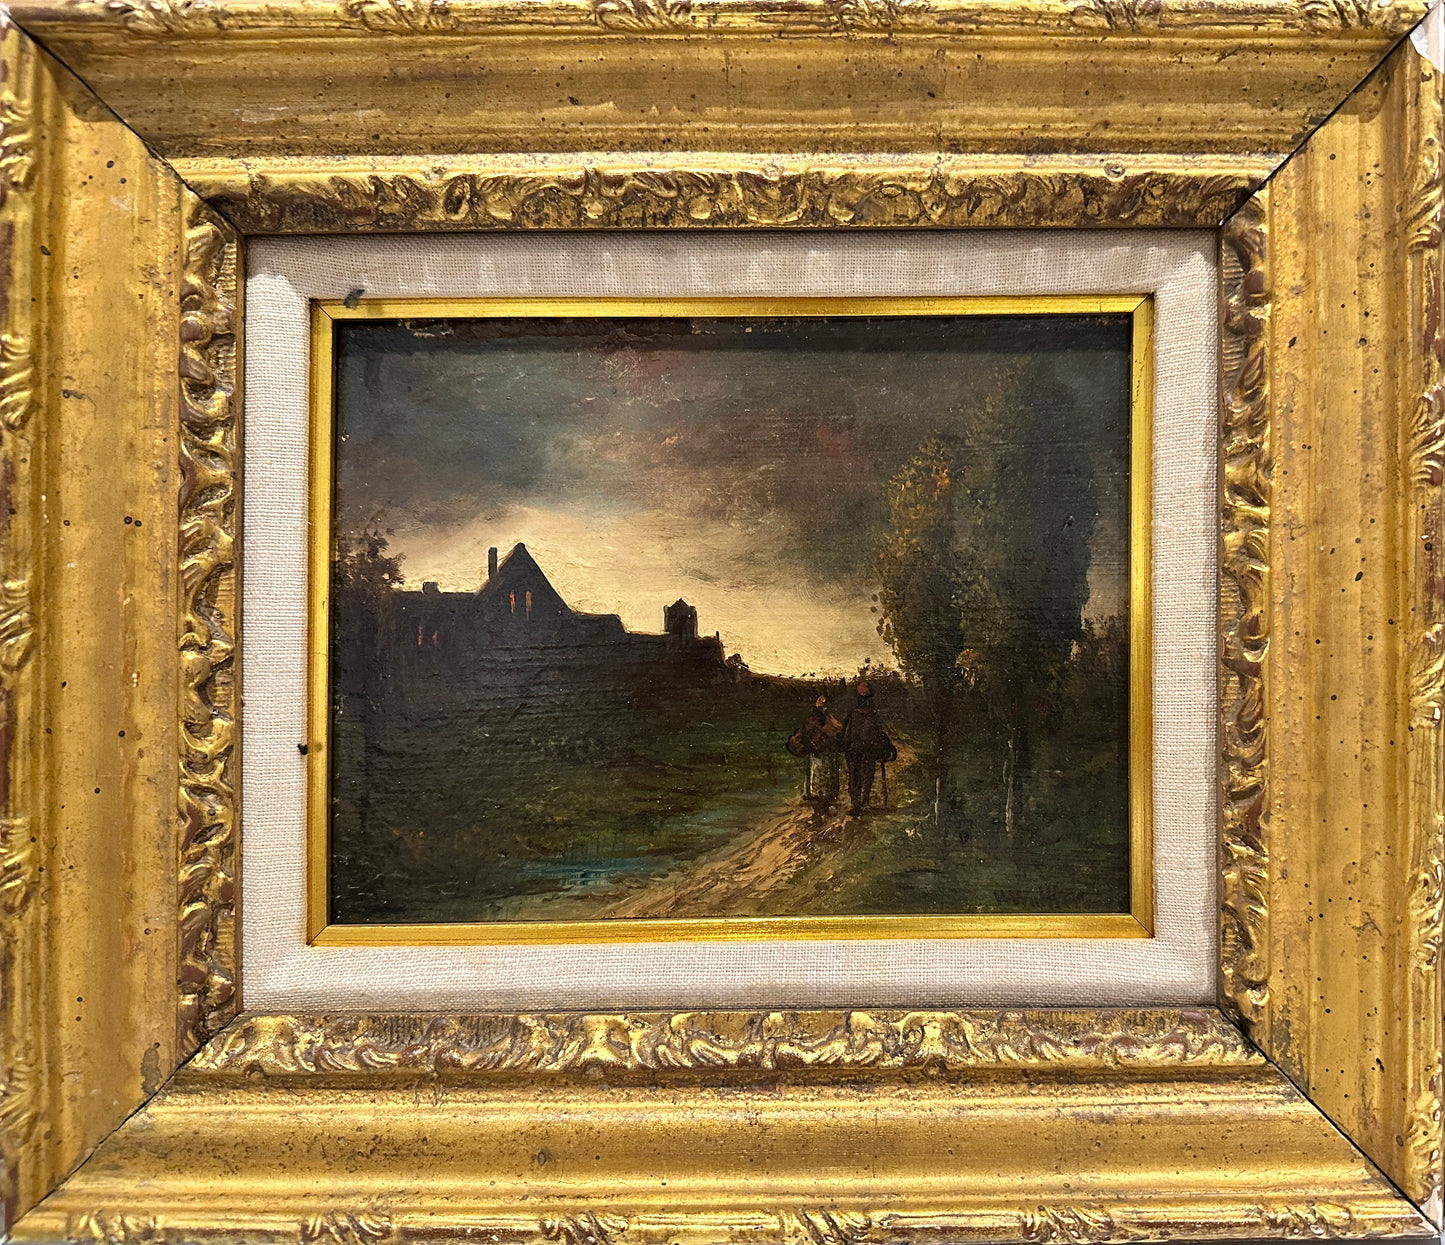 William Walker Oil Painting: Two workers walking on a path